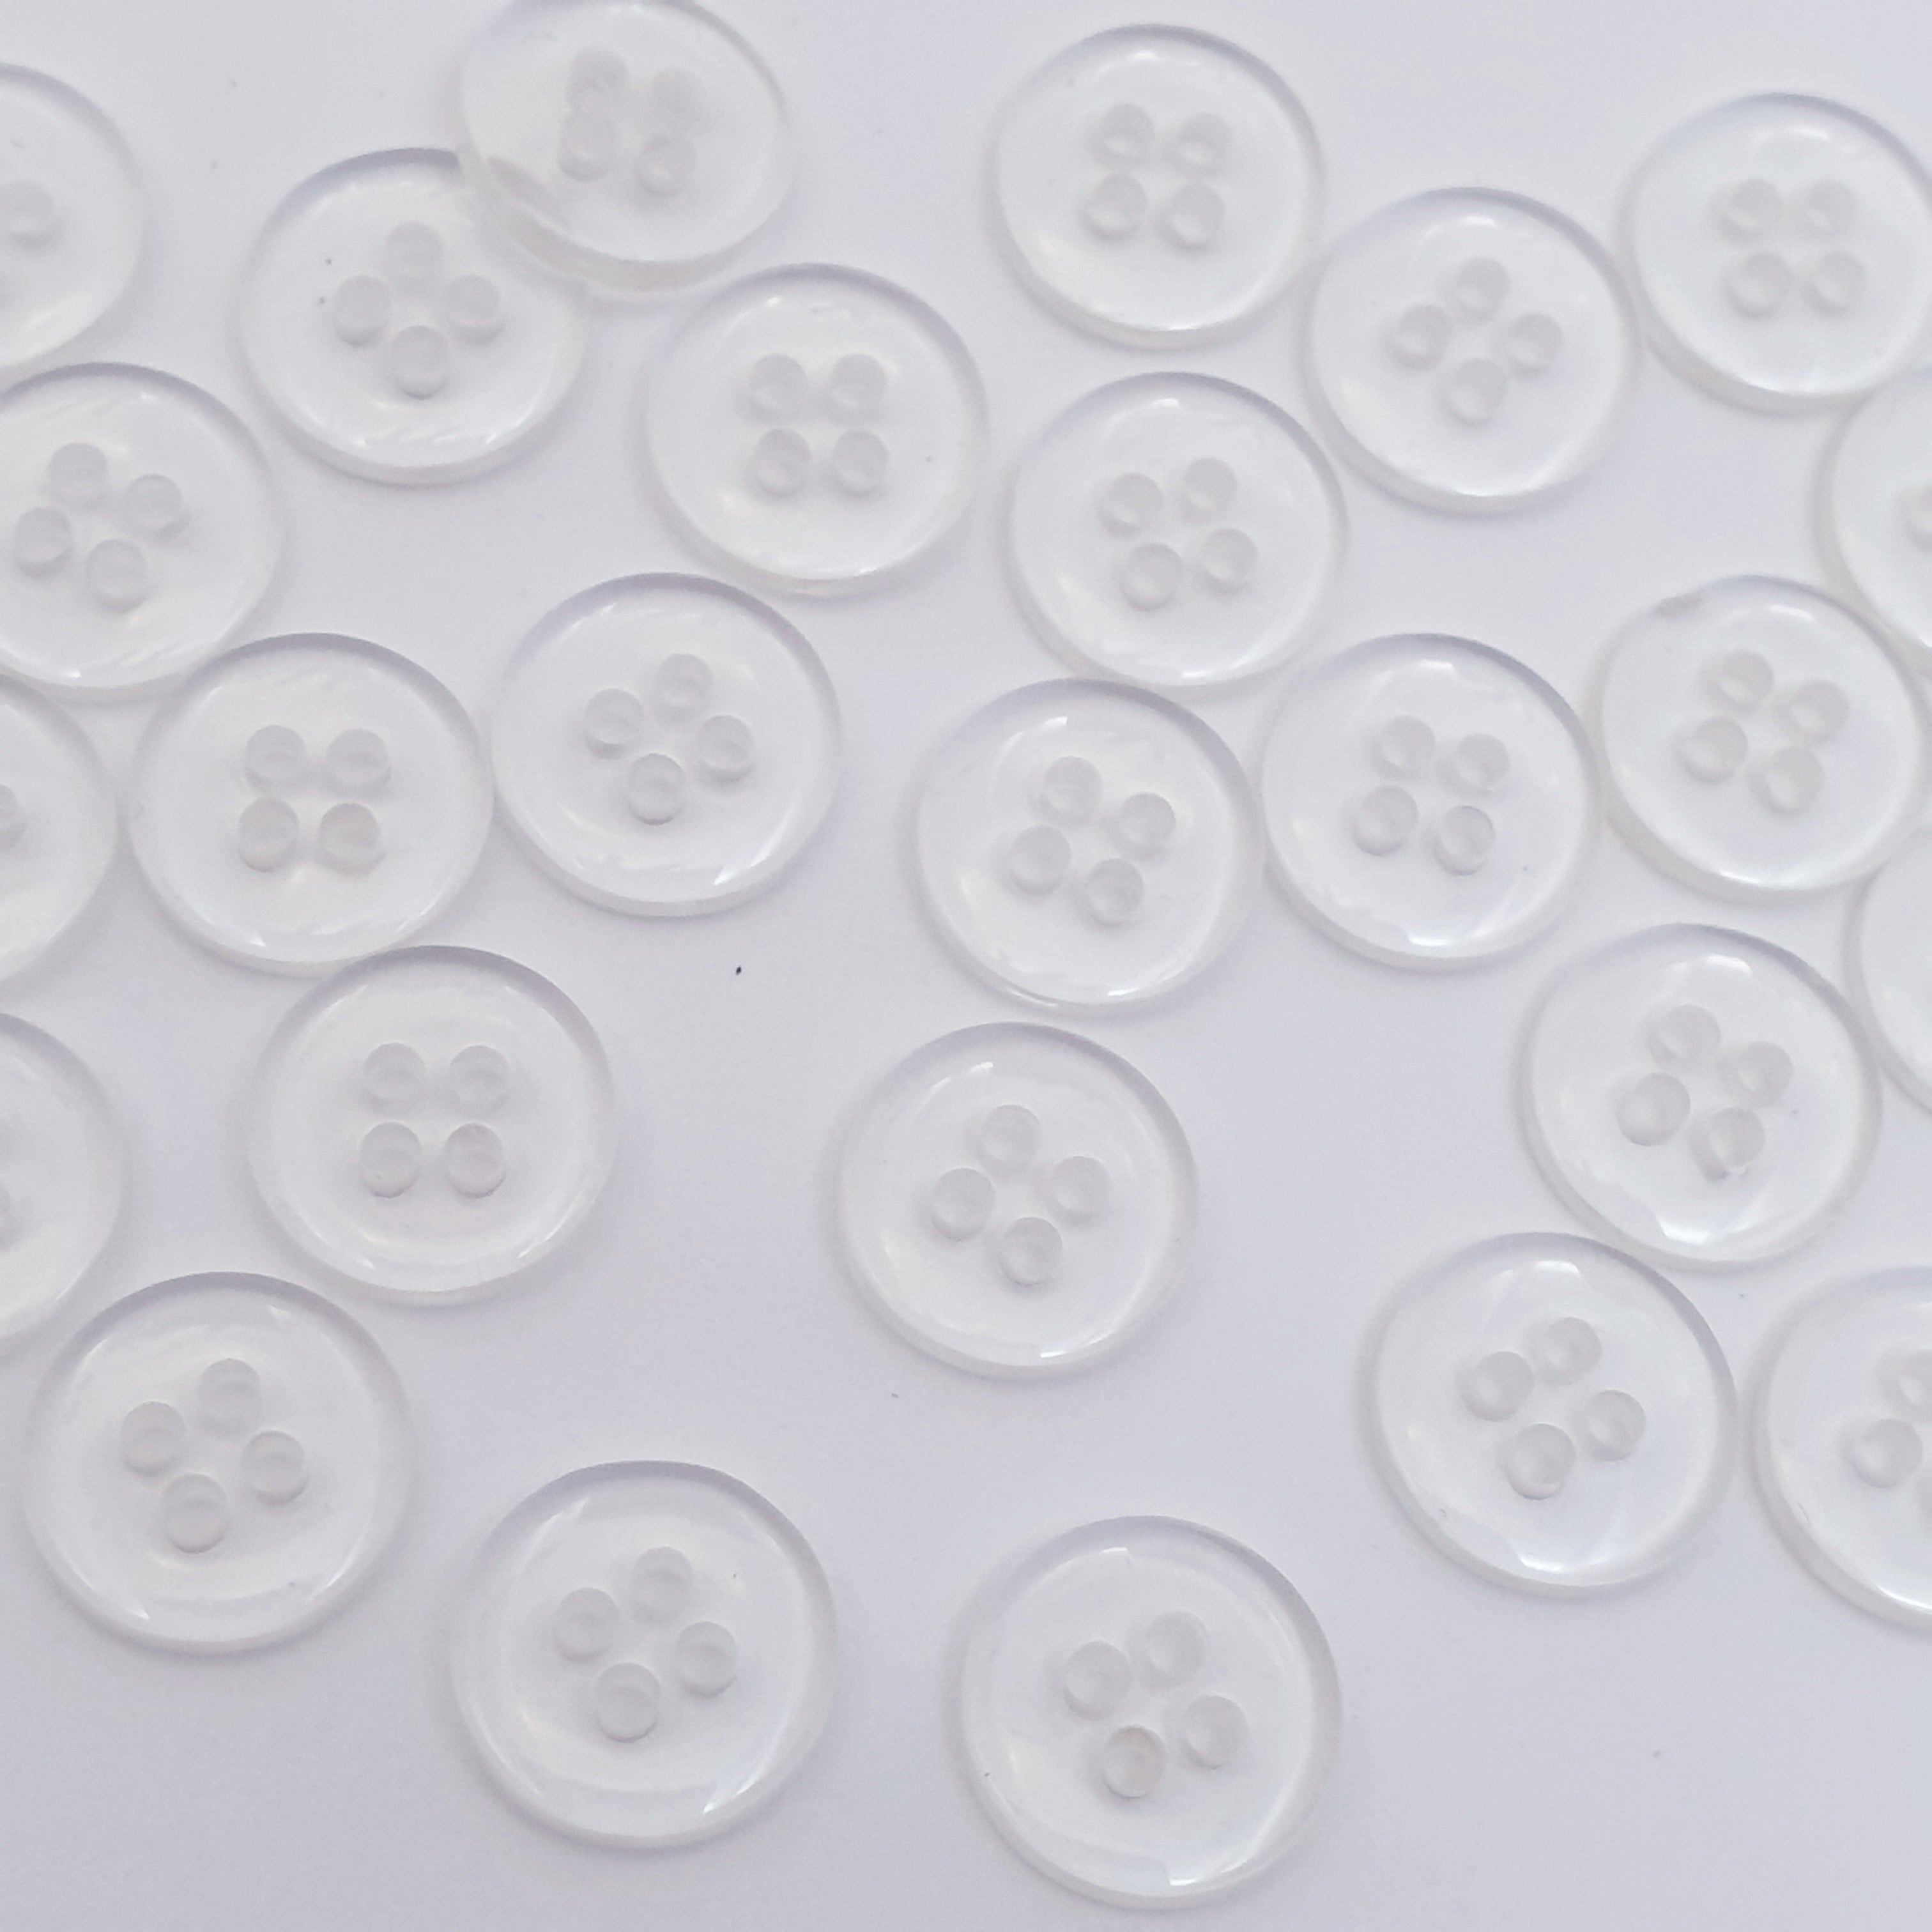 MajorCrafts 100pcs 12.5mm Transparent Clear 4 Holes Small Round Resin Sewing Buttons